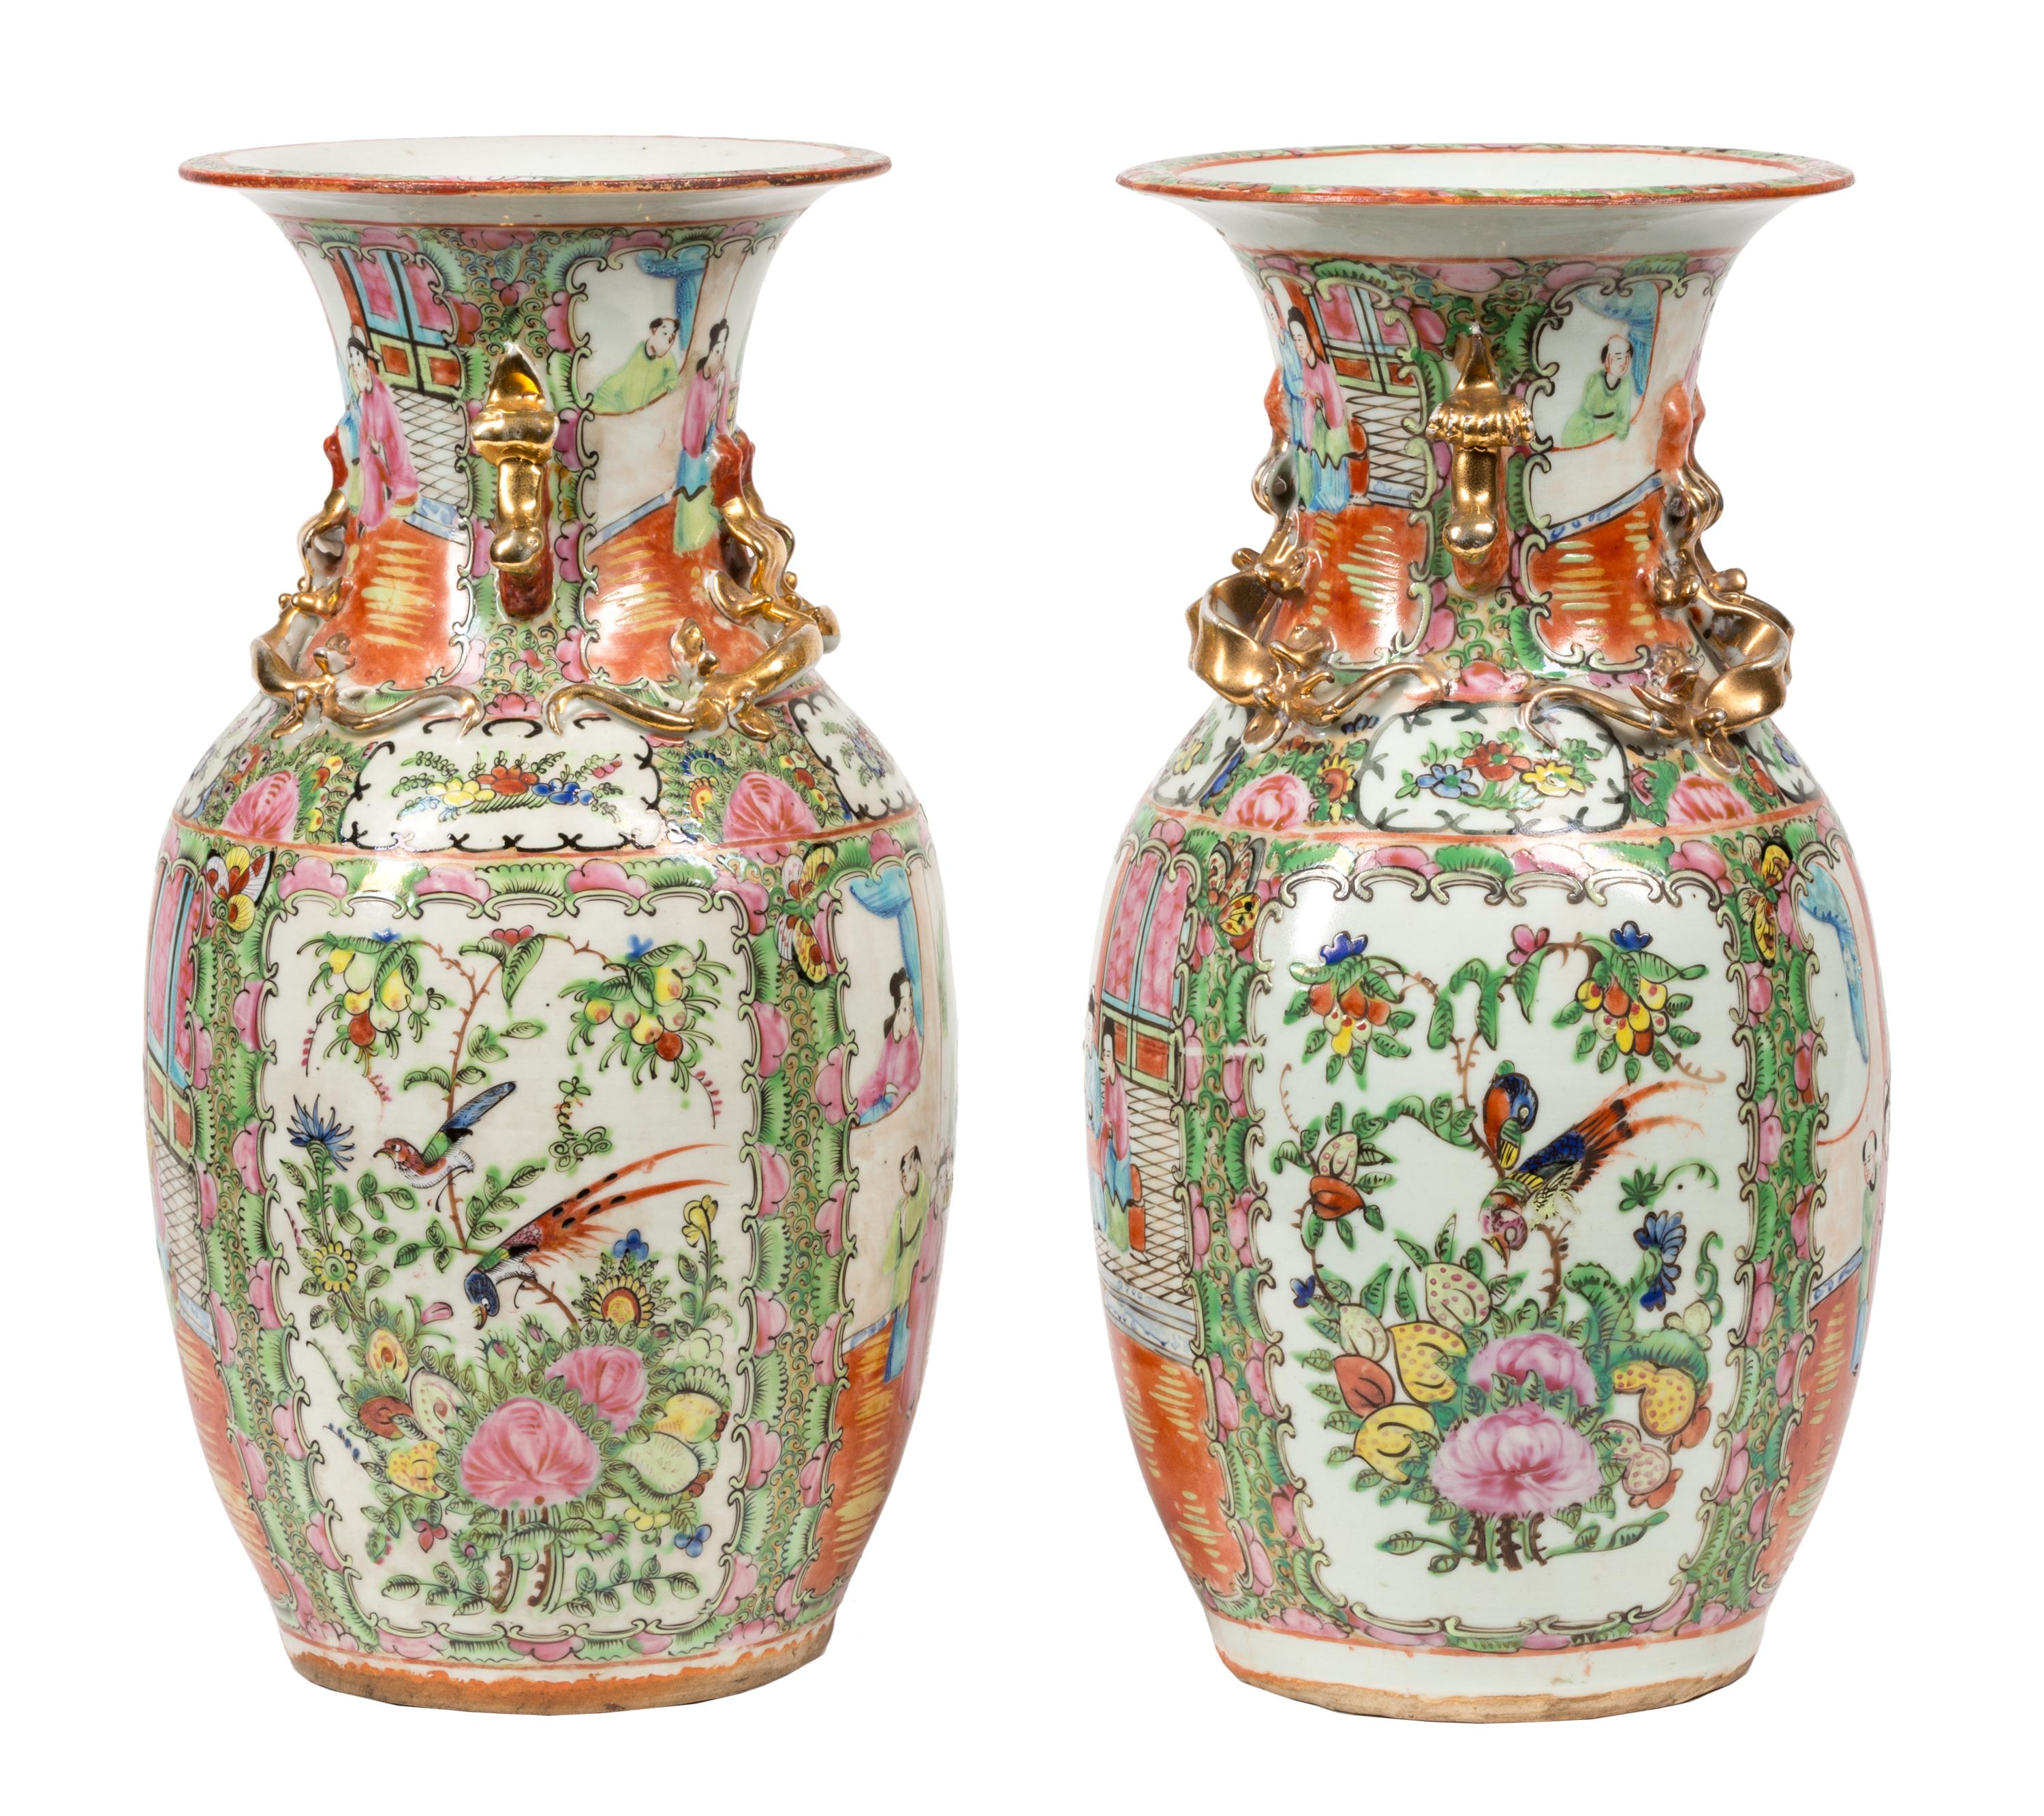 A pair of late 19th century Canton Chinese porcelain famille-rose urns / vases, featuring hand painted vegetation, birds, flowers and scenes of traditionally dressed figures. Around the necks are small raised sculptural dragons and foo dogs in gold.